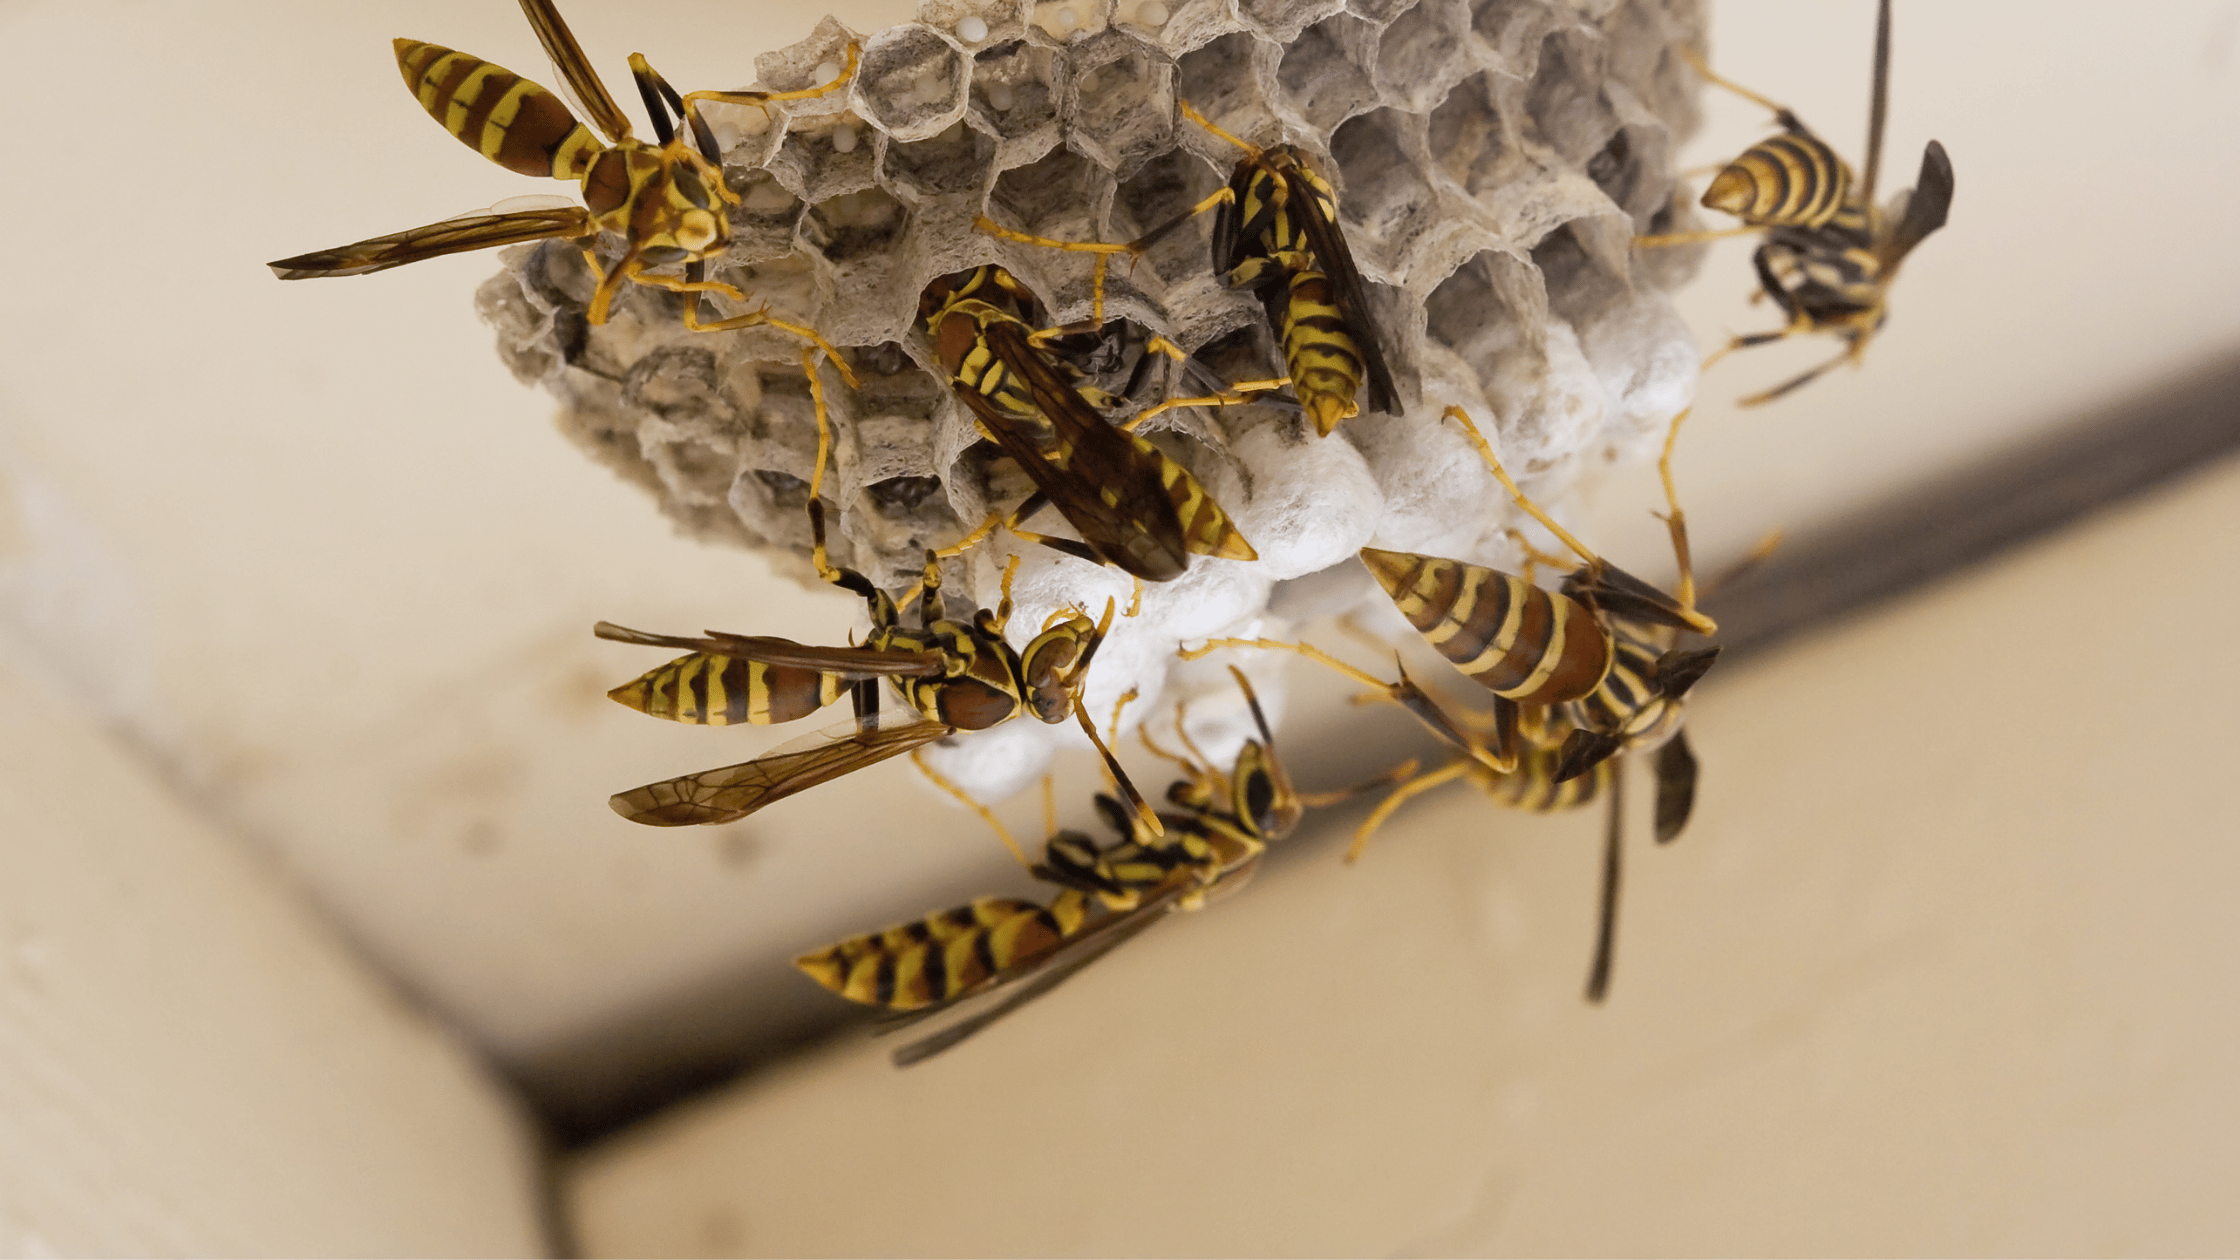 Can A Wasp Nest Damage Your House?